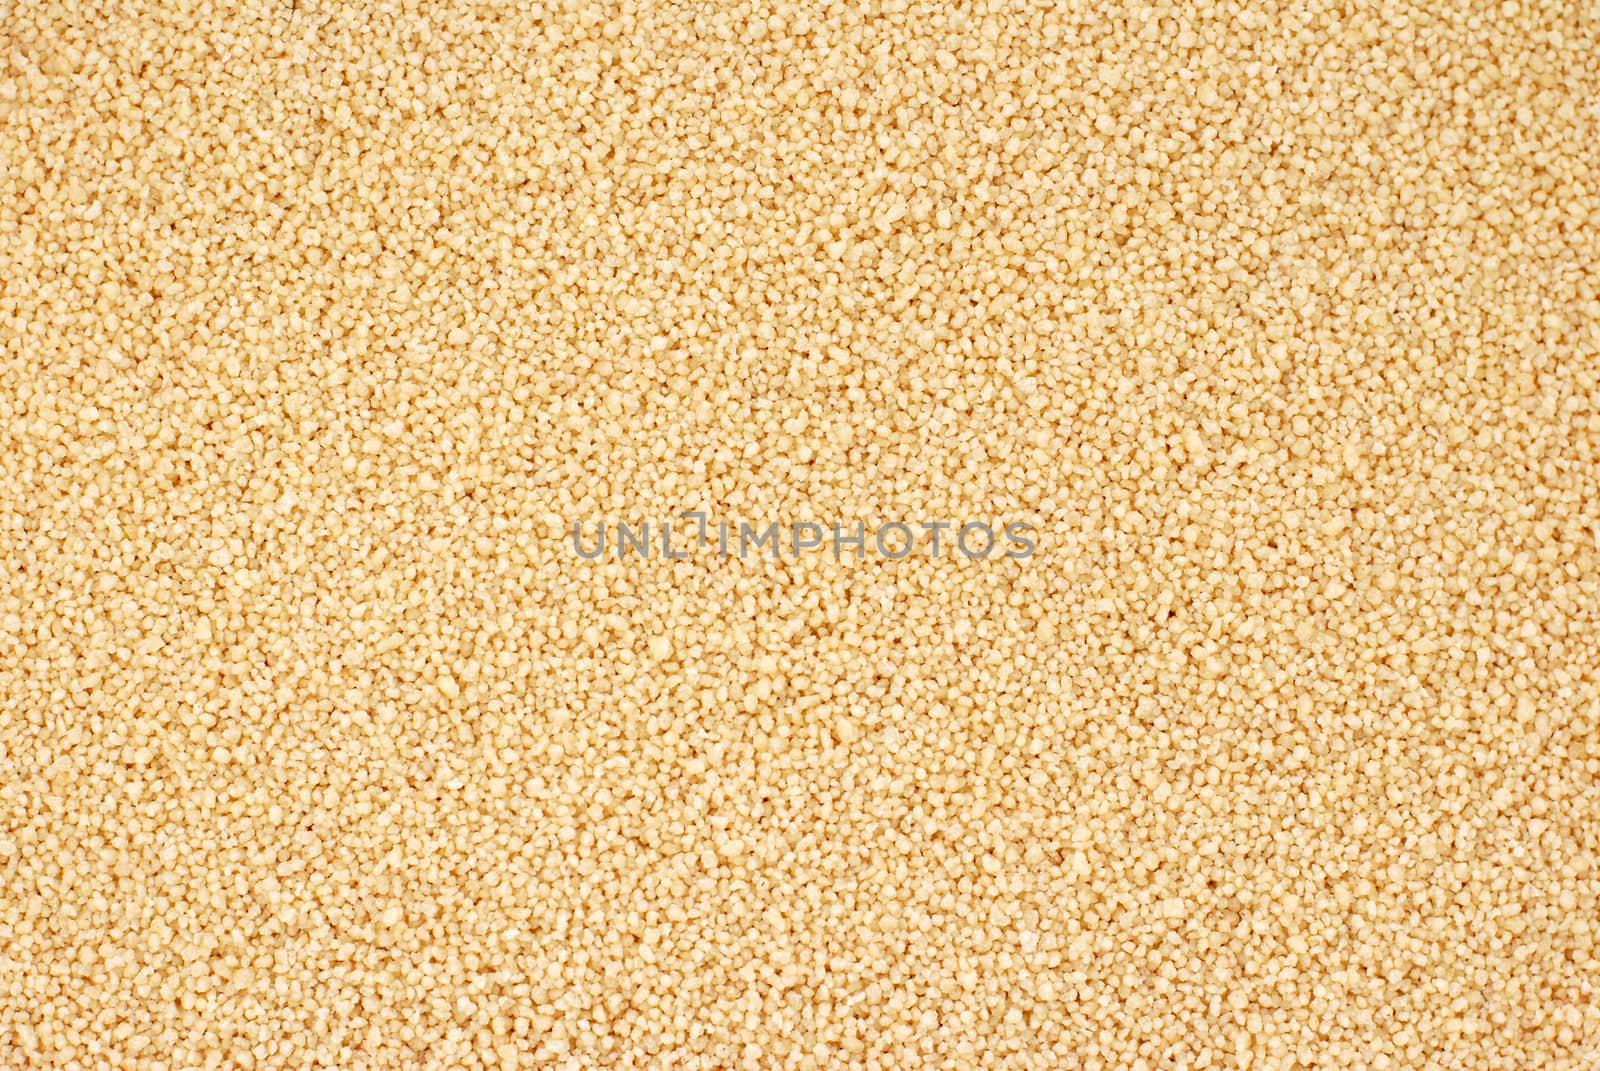 Cous-cous abstract background texture